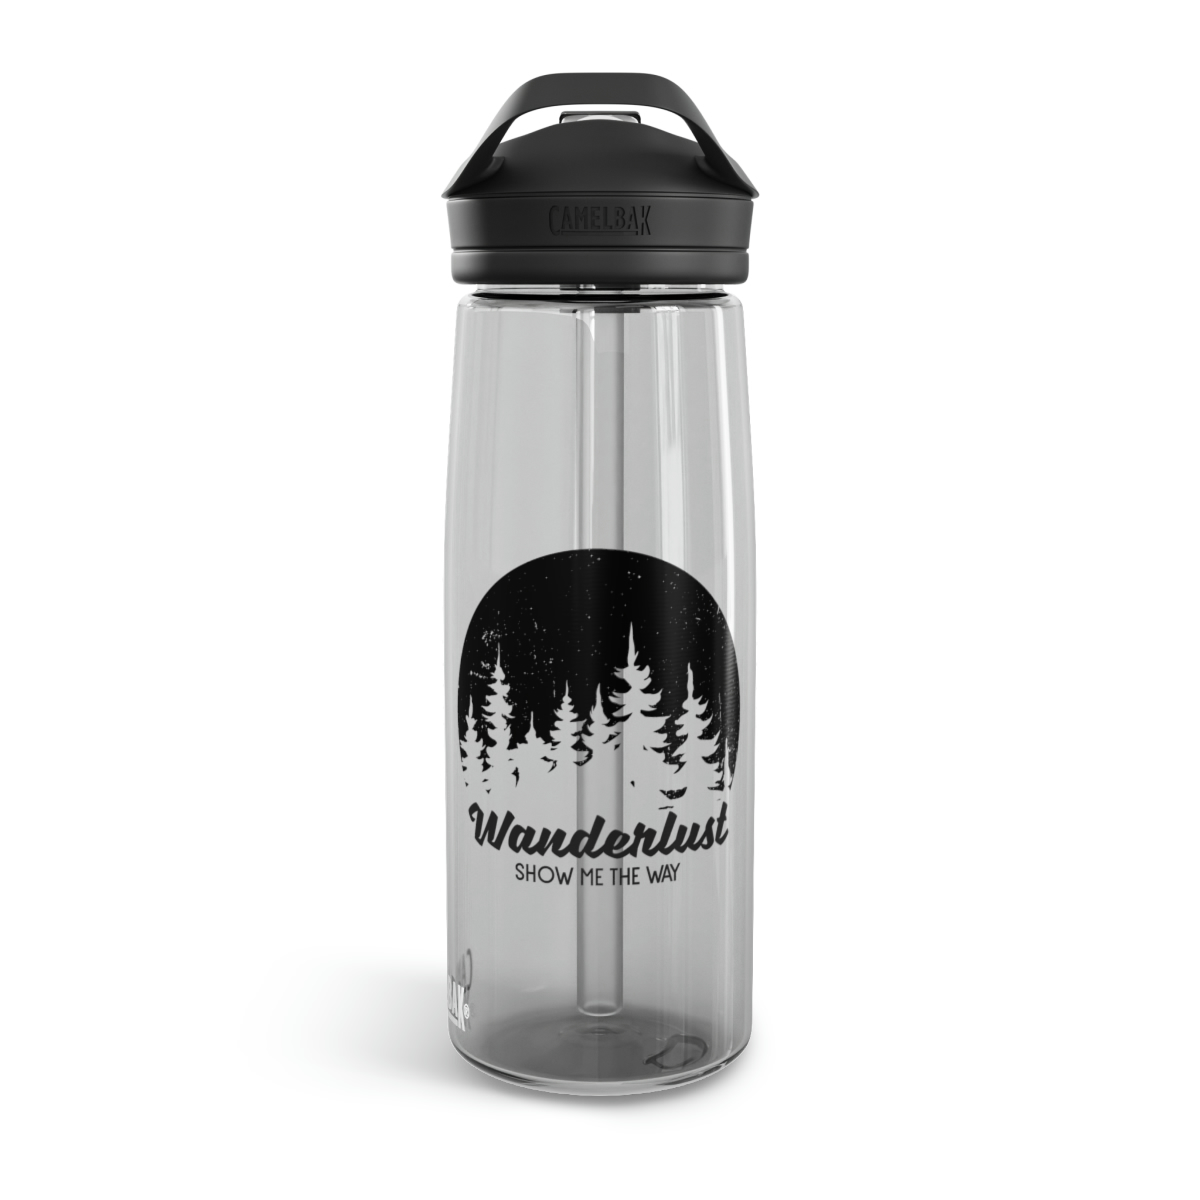 Primary image for CamelBak Eddy Water Bottle, 20oz/25oz, Personalized, Tritan Material, BPA-Free, 